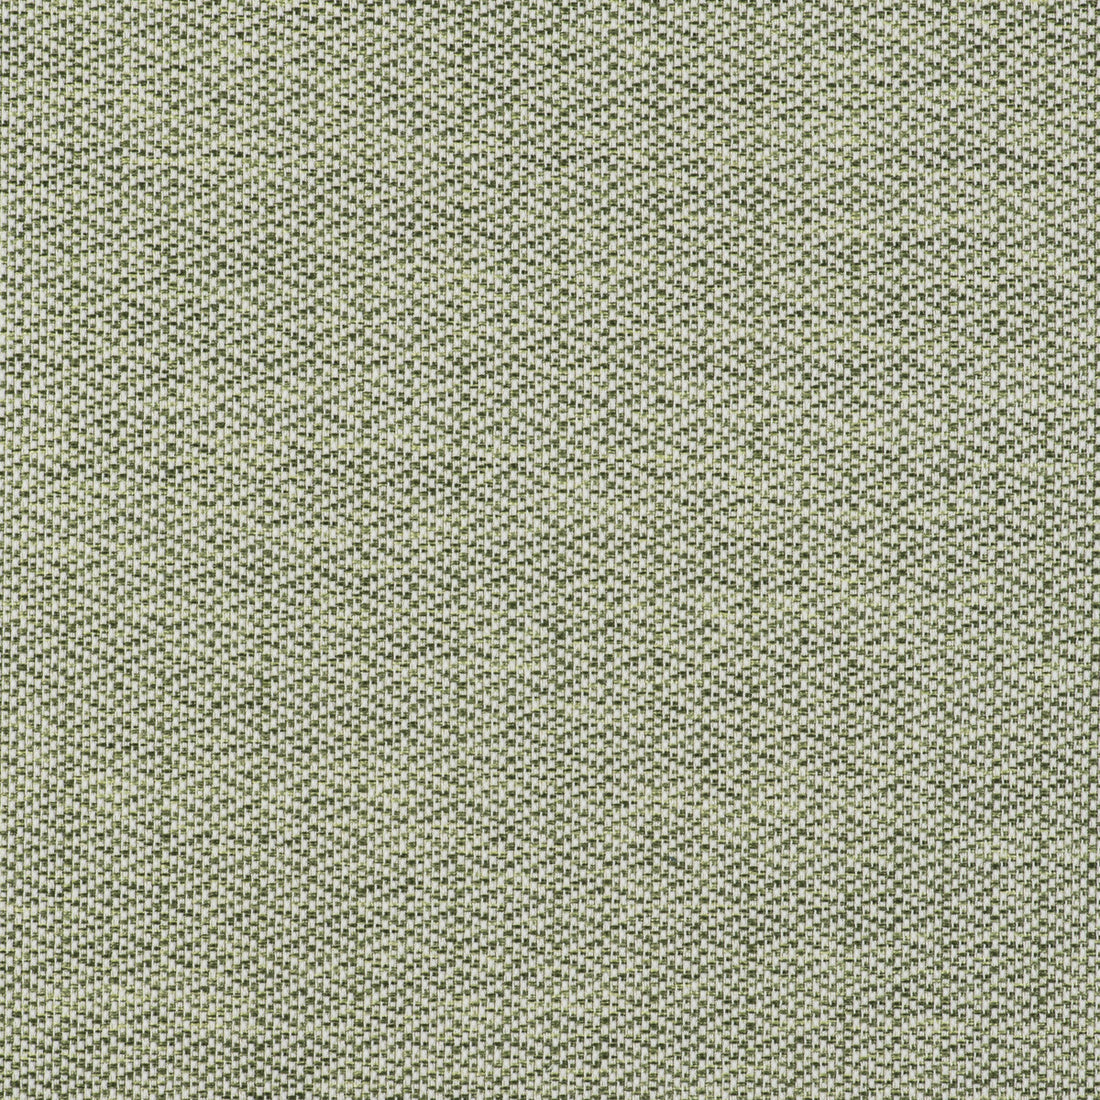 Rombos fabric in verde color - pattern GDT5509.005.0 - by Gaston y Daniela in the Gaston Libreria collection